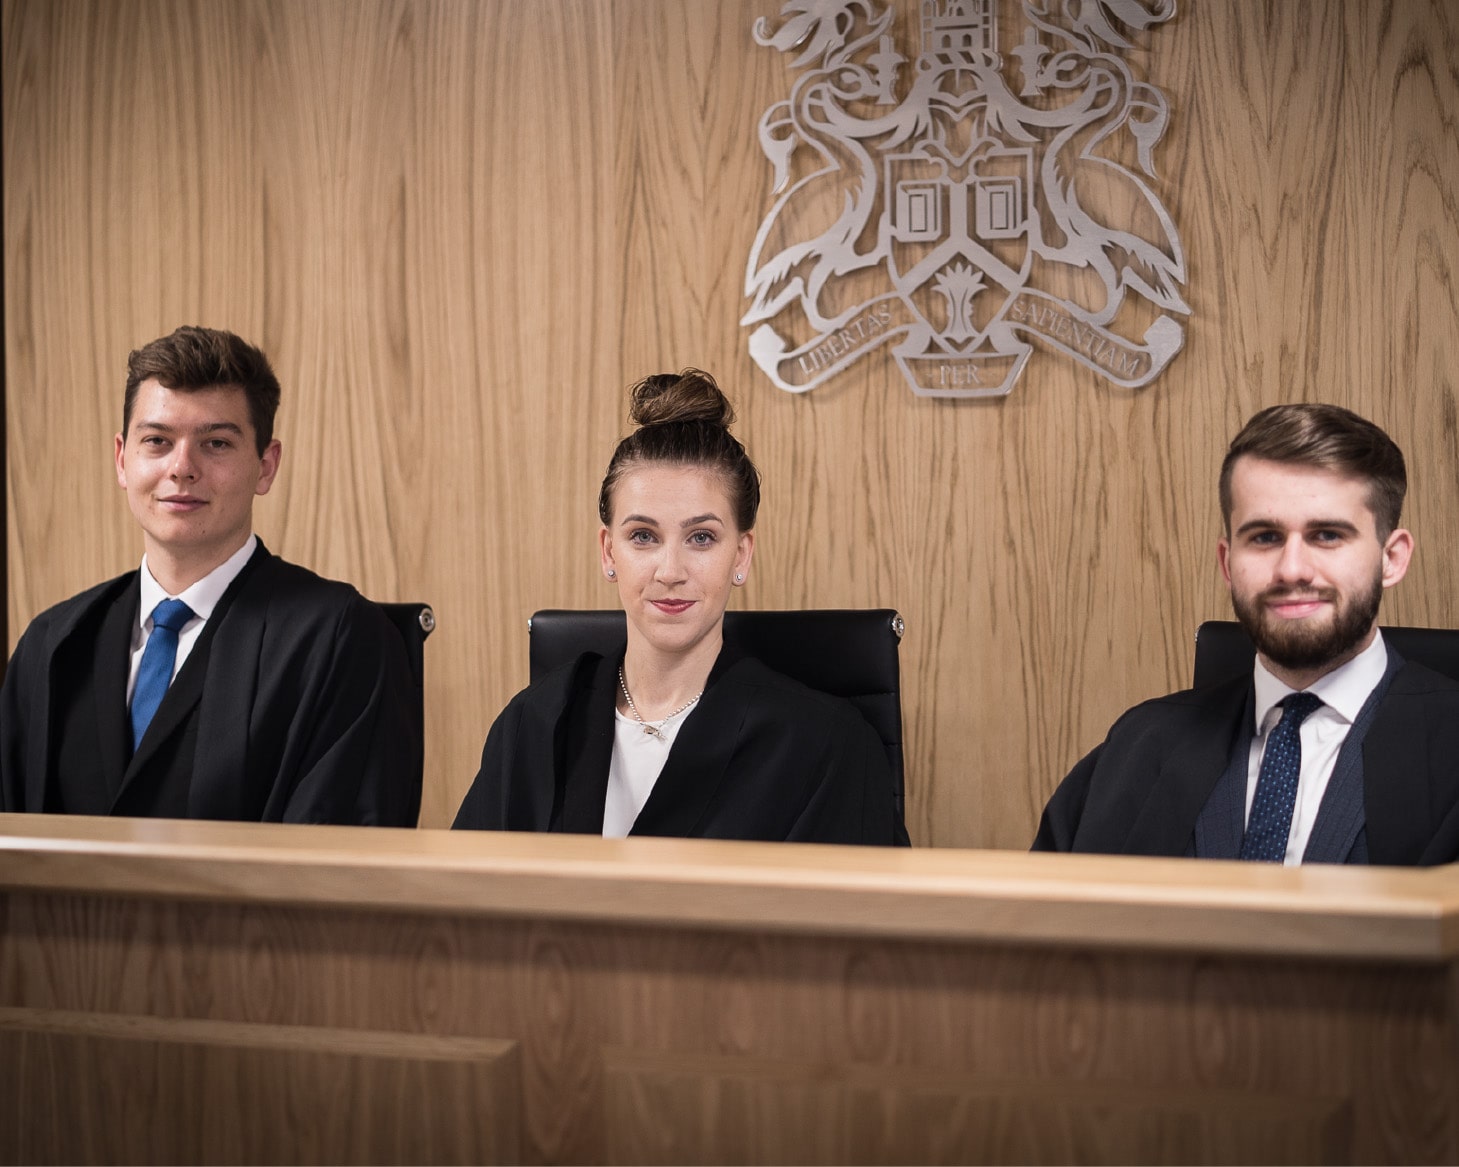 Law students in the Moot Court